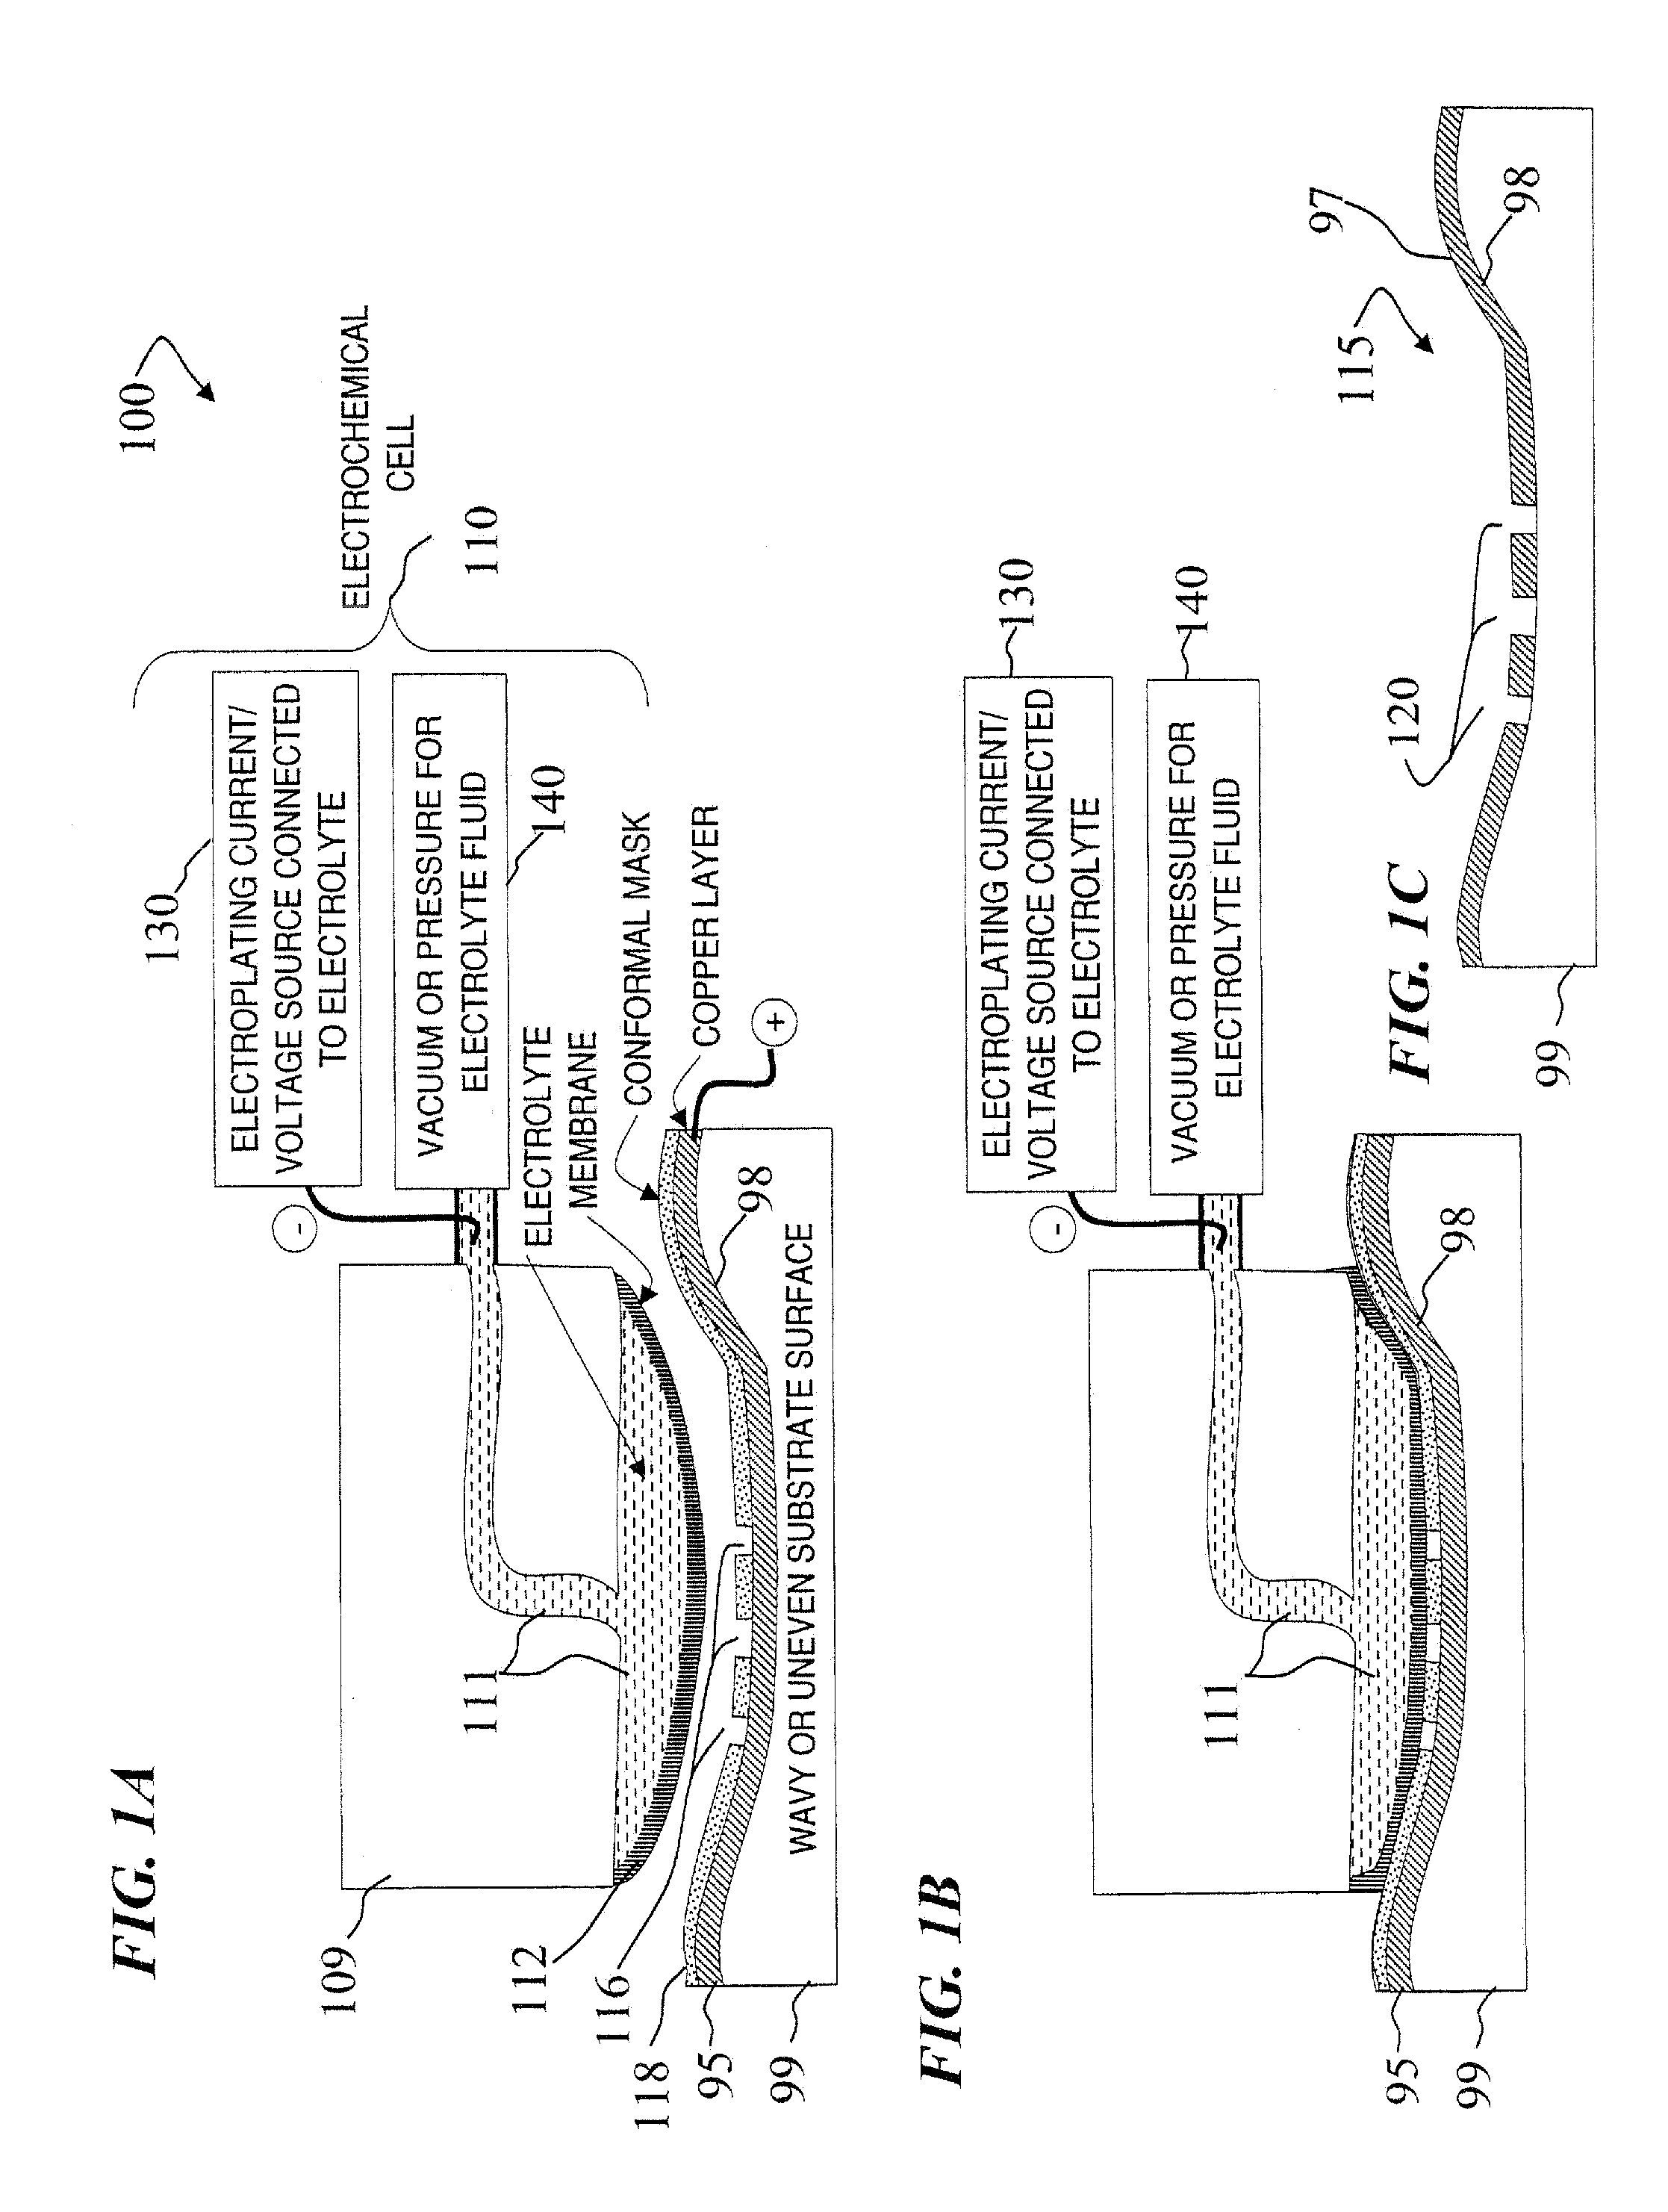 Method for focused electric-field imprinting for micron and sub-micron patterns on wavy or planar surfaces